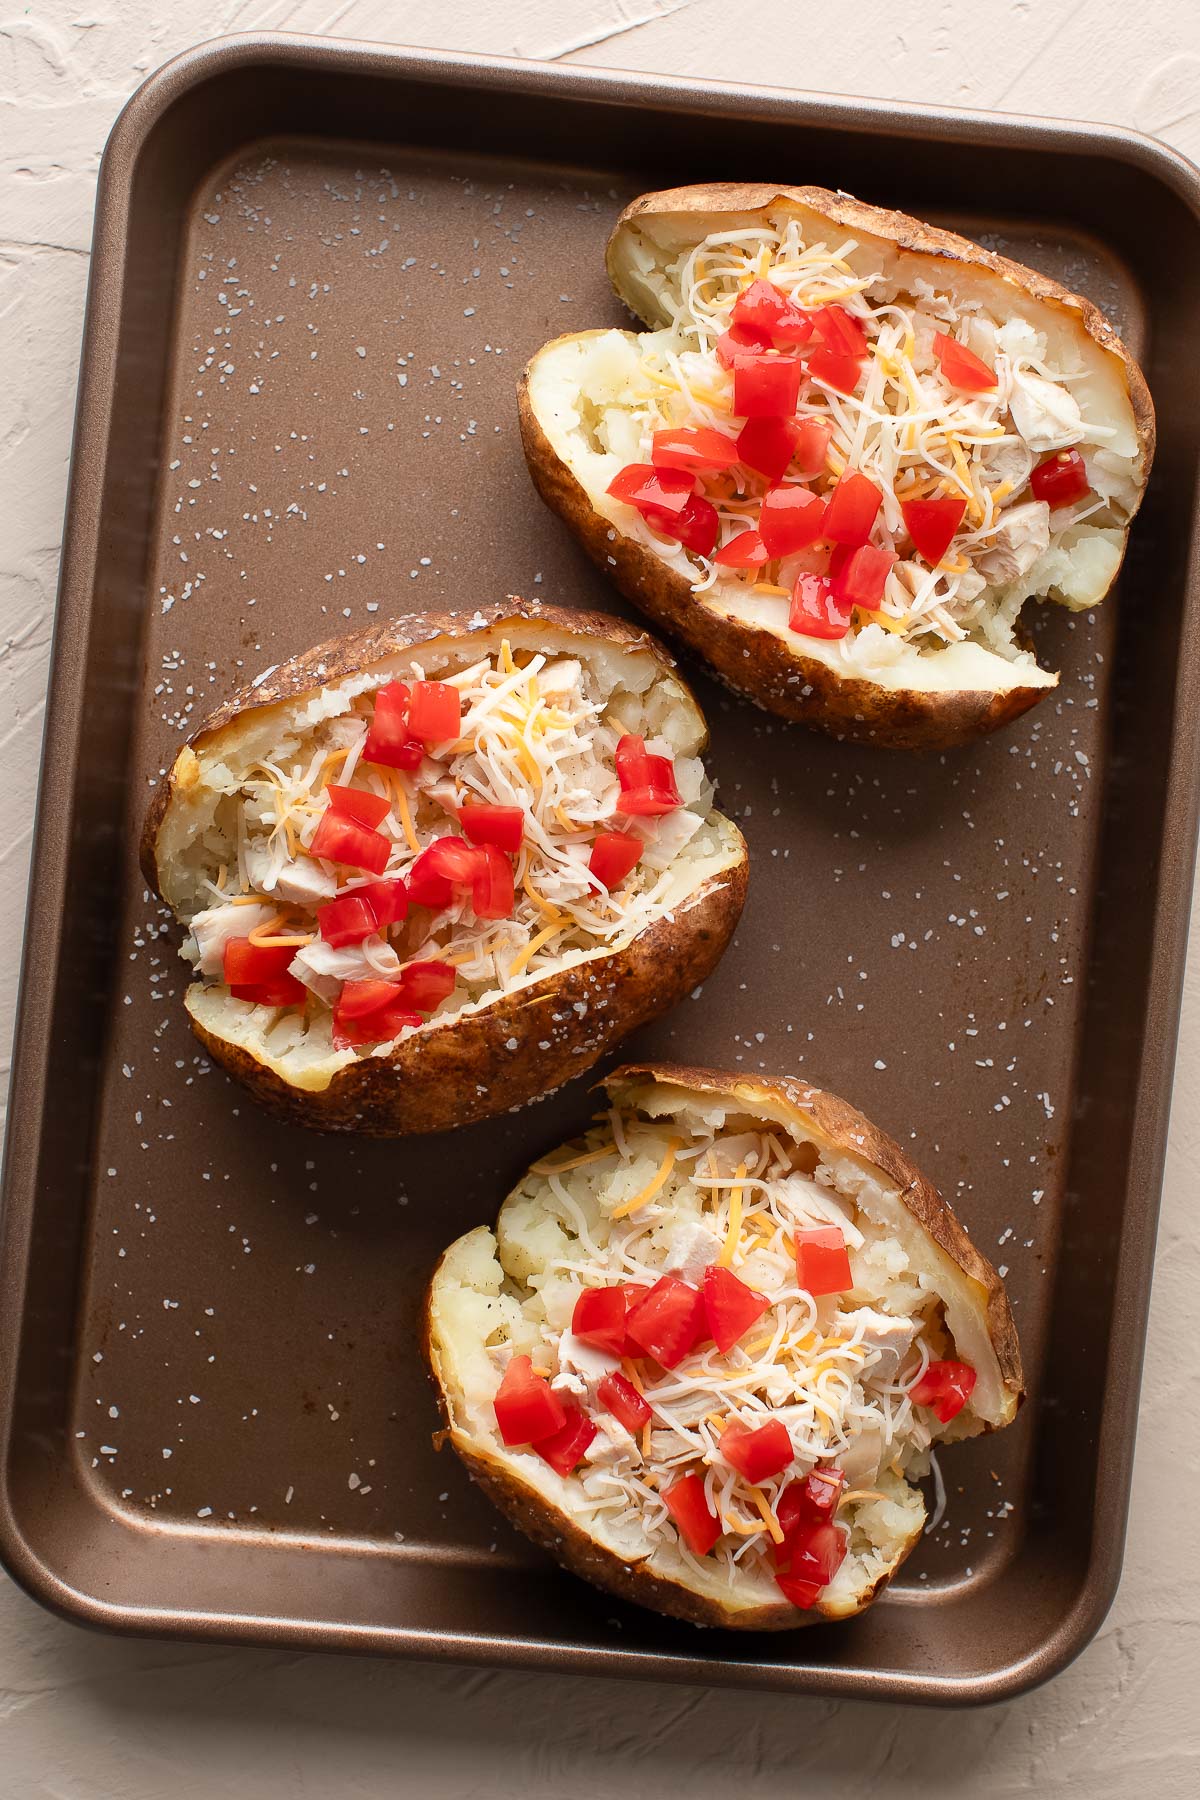 Baked Potatoes with Chicken, Cheese, and Tomatoes